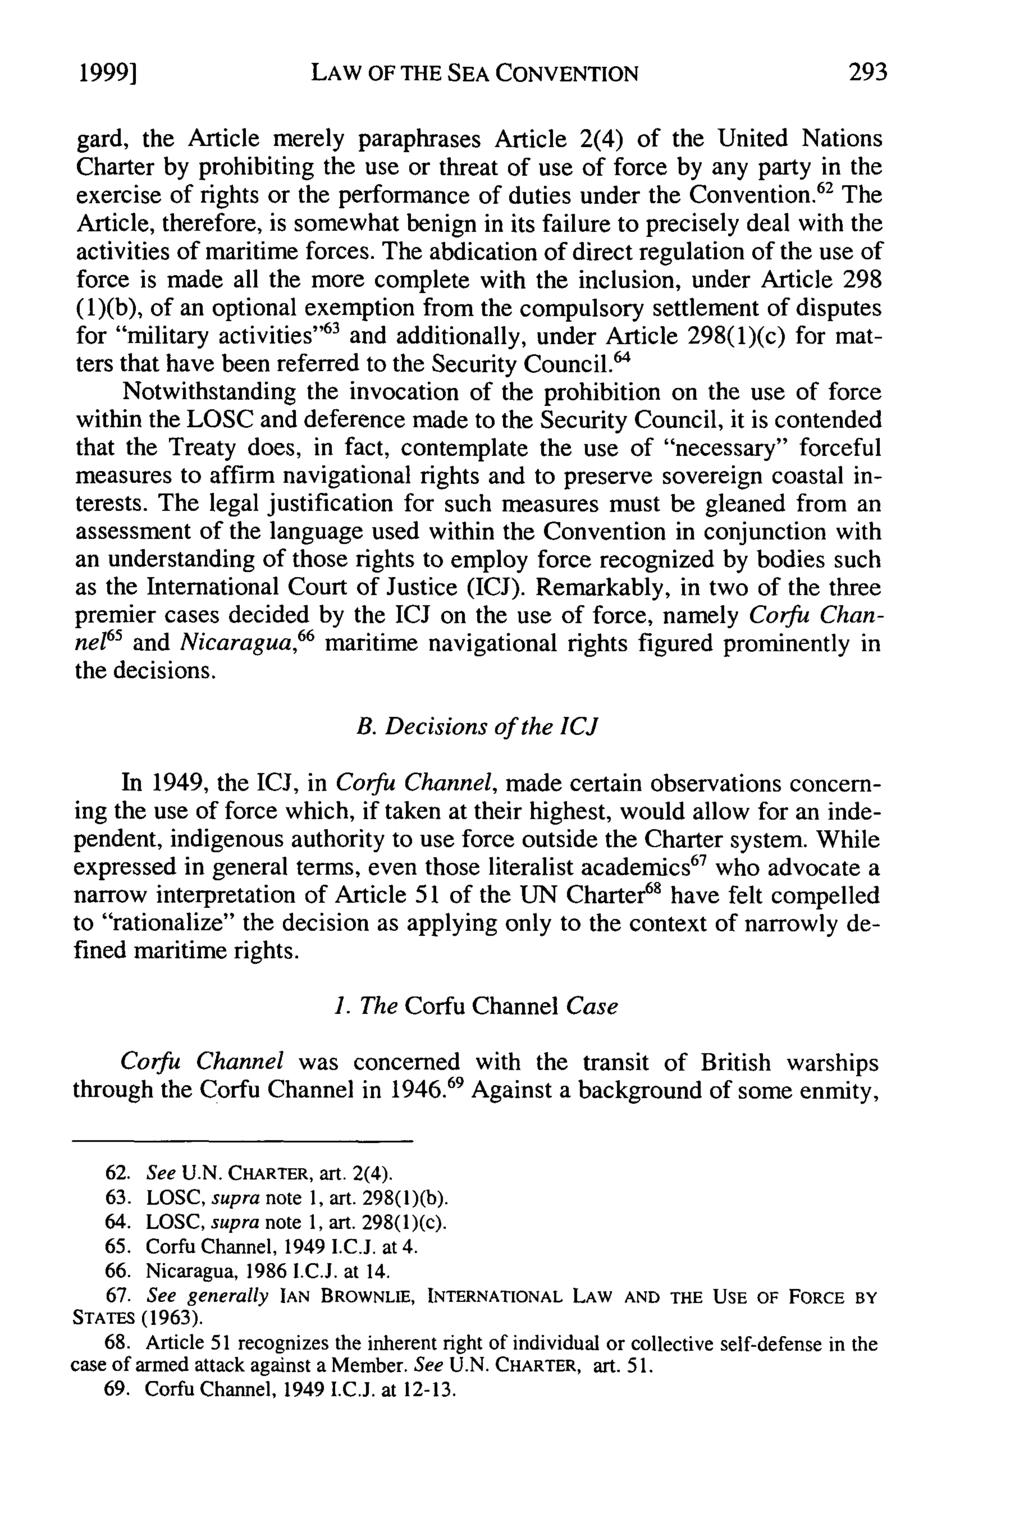 1999] Stephens: The Impact of the 1982 Law of the Sea Convention on the Conduct o LAW OF THE SEA CONVENTION gard, the Article merely paraphrases Article 2(4) of the United Nations Charter by